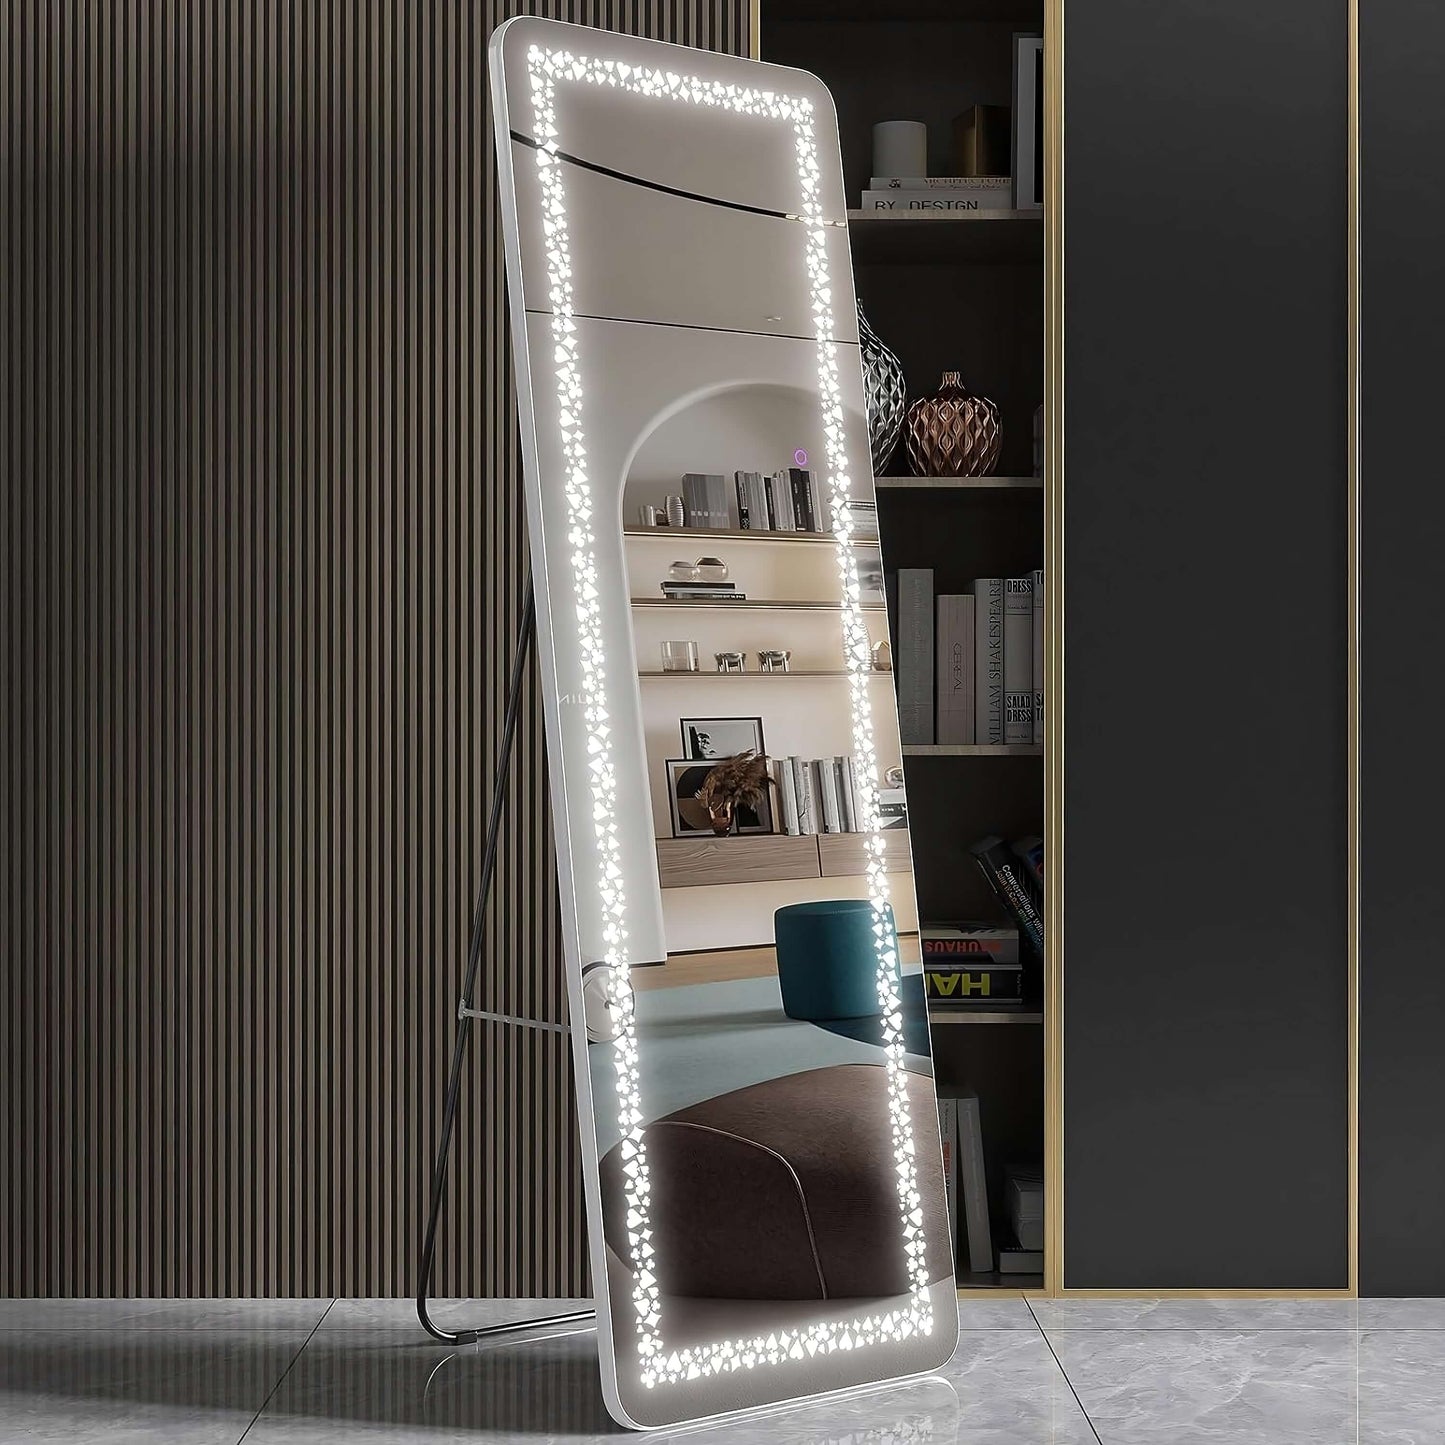 WETA® Unique 63" x 20" Mirror with 3 Color LED Lights | Full Body Mirror, Free Standing Wall Mounted Hanging Mirror